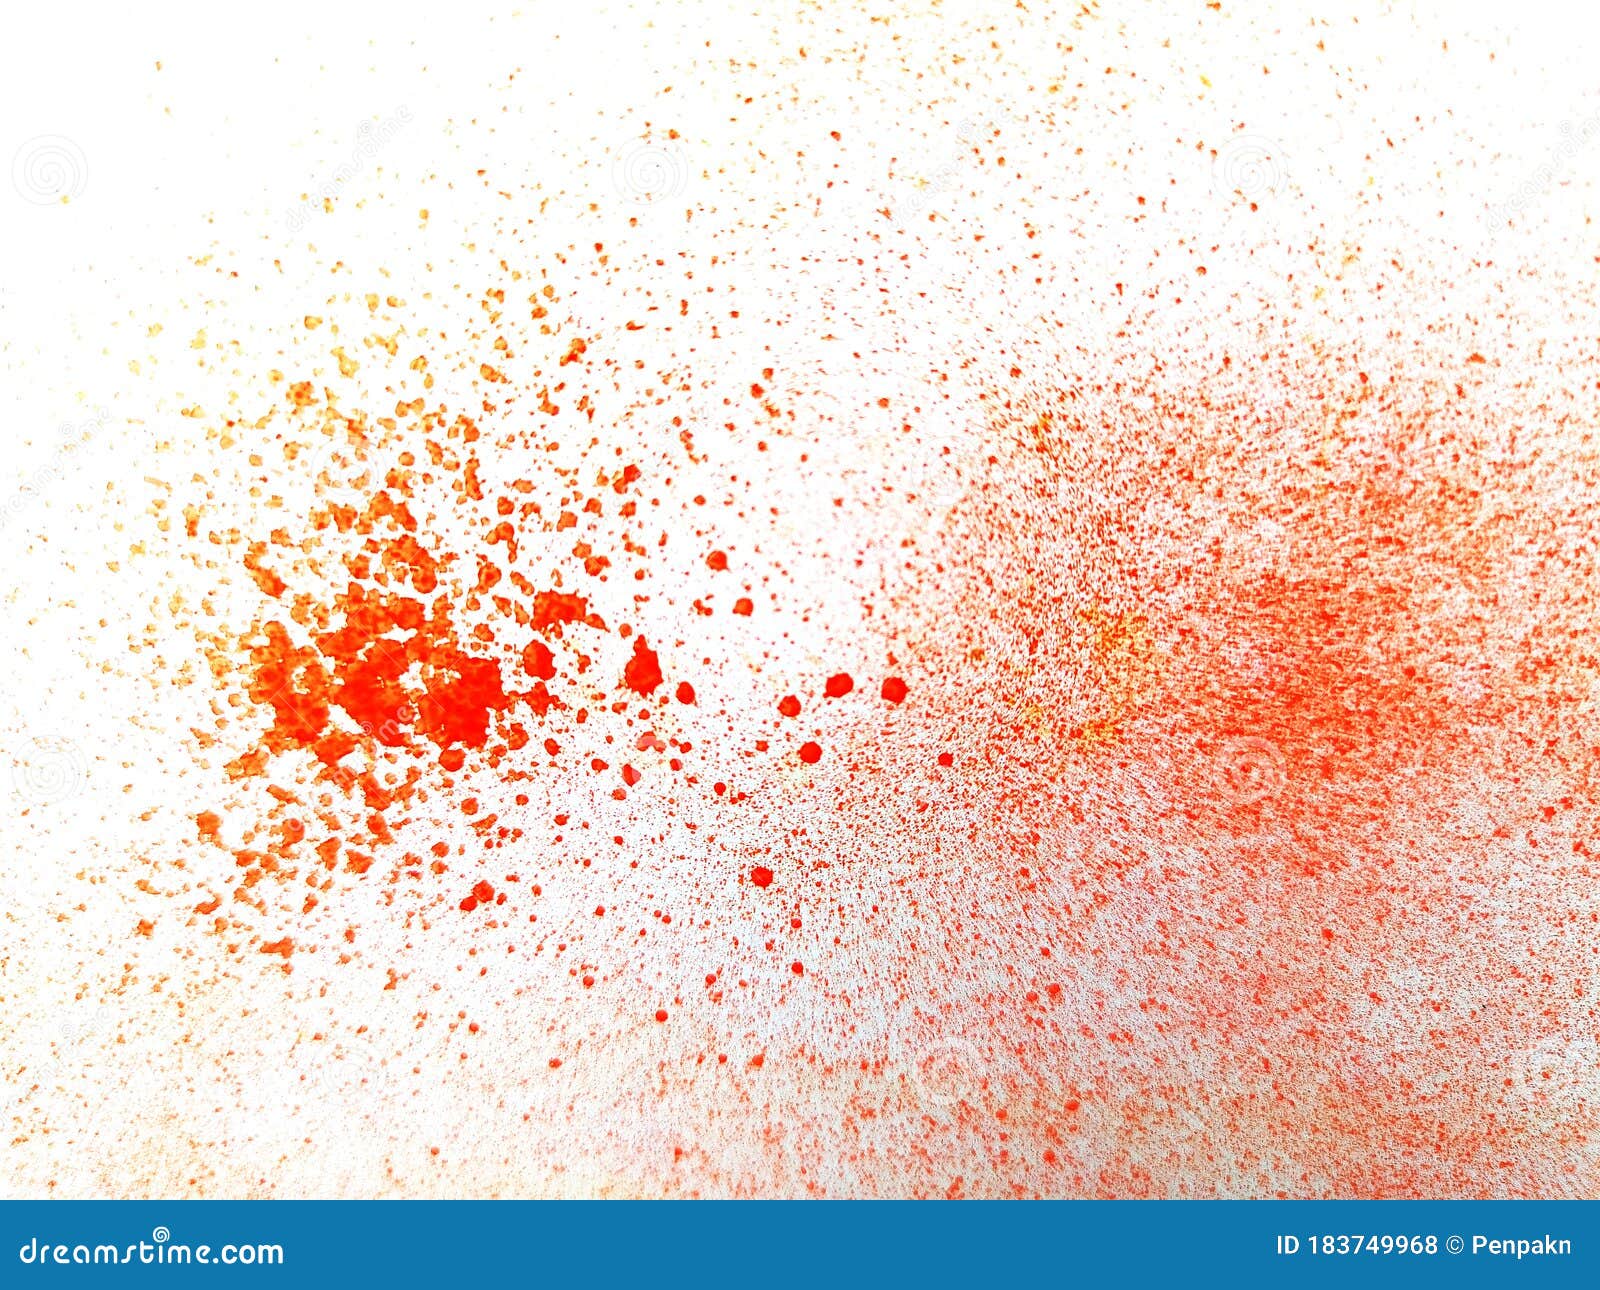 Red Drops Color Spread on White Paper for Abstract Artwork Background Stock  Photo - Image of watercolor, soft: 183749968